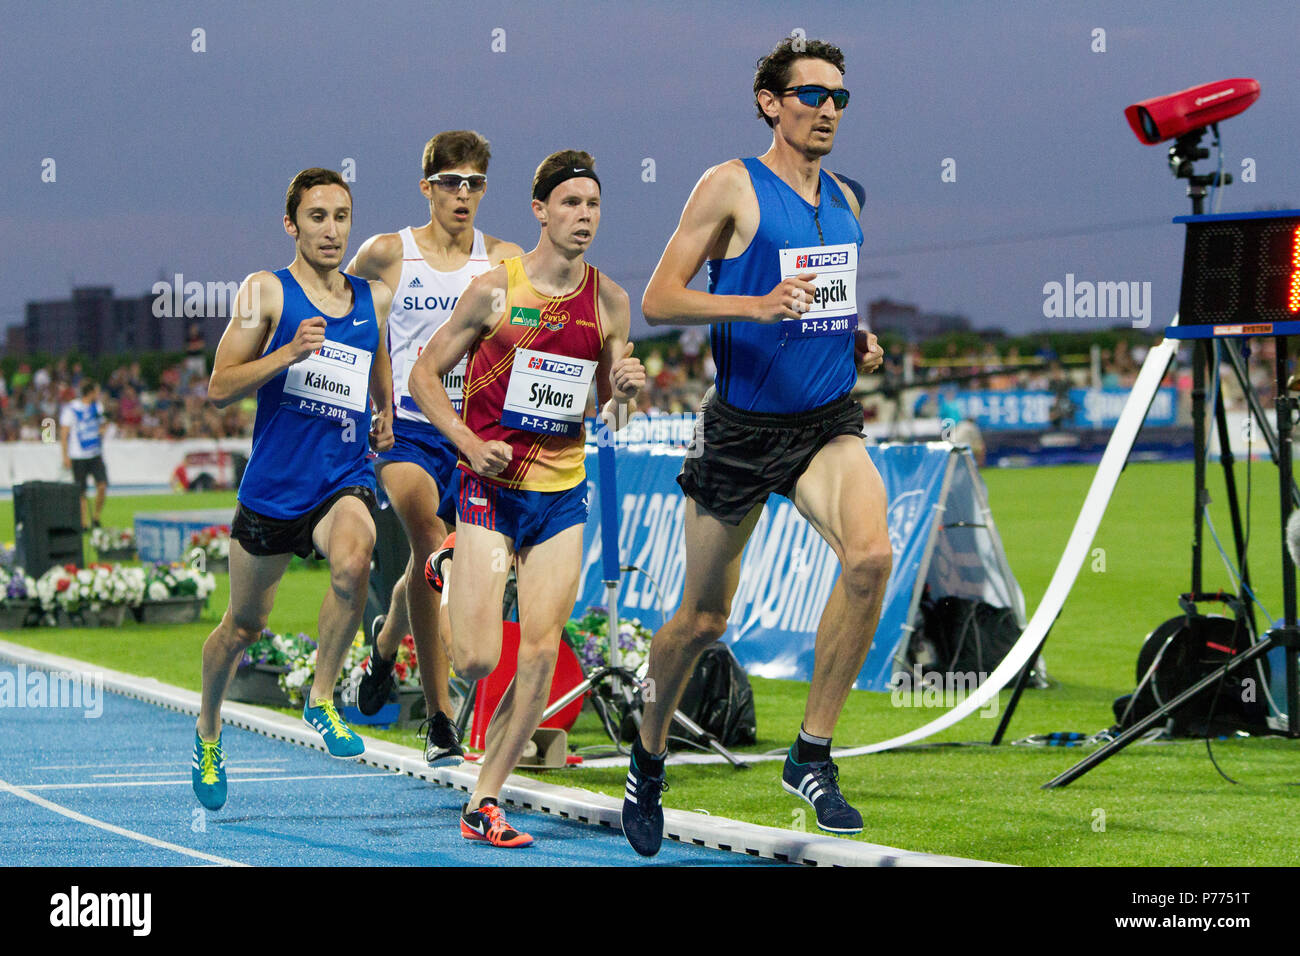 Men's 1500 metre run at the P-T-S athletics meeting in the sports site of x-bionic sphere® in Šamorín, Slovakia Stock Photo